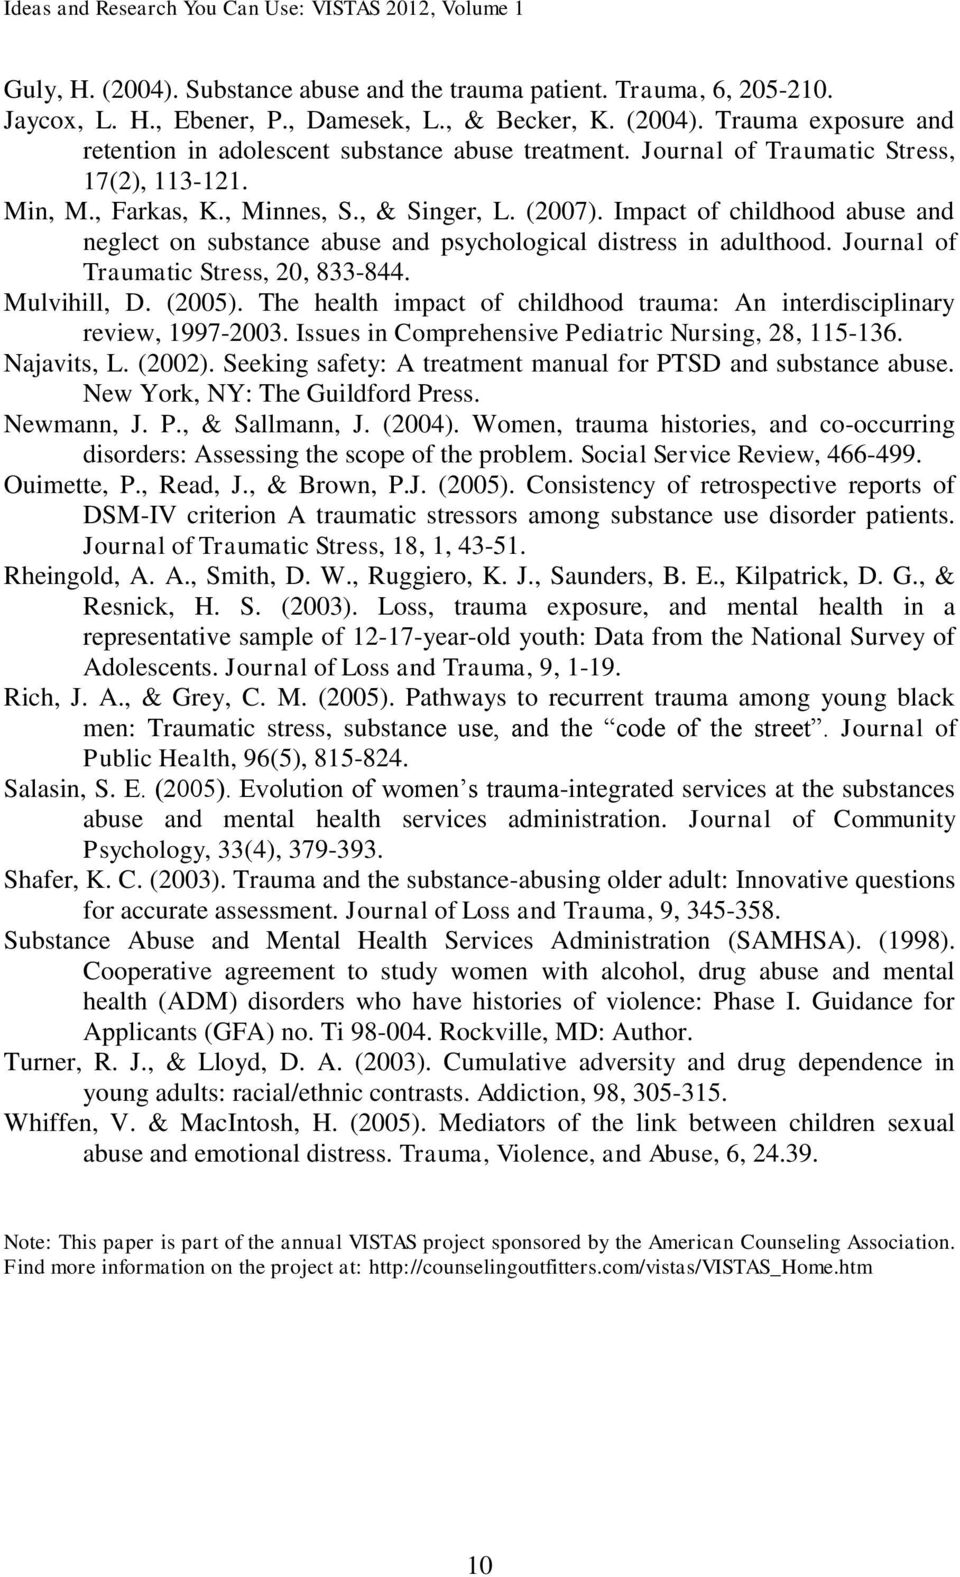 Journal of Traumatic Stress, 20, 833-844. Mulvihill, D. (2005). The health impact of childhood trauma: An interdisciplinary review, 1997-2003. Issues in Comprehensive Pediatric Nursing, 28, 115-136.